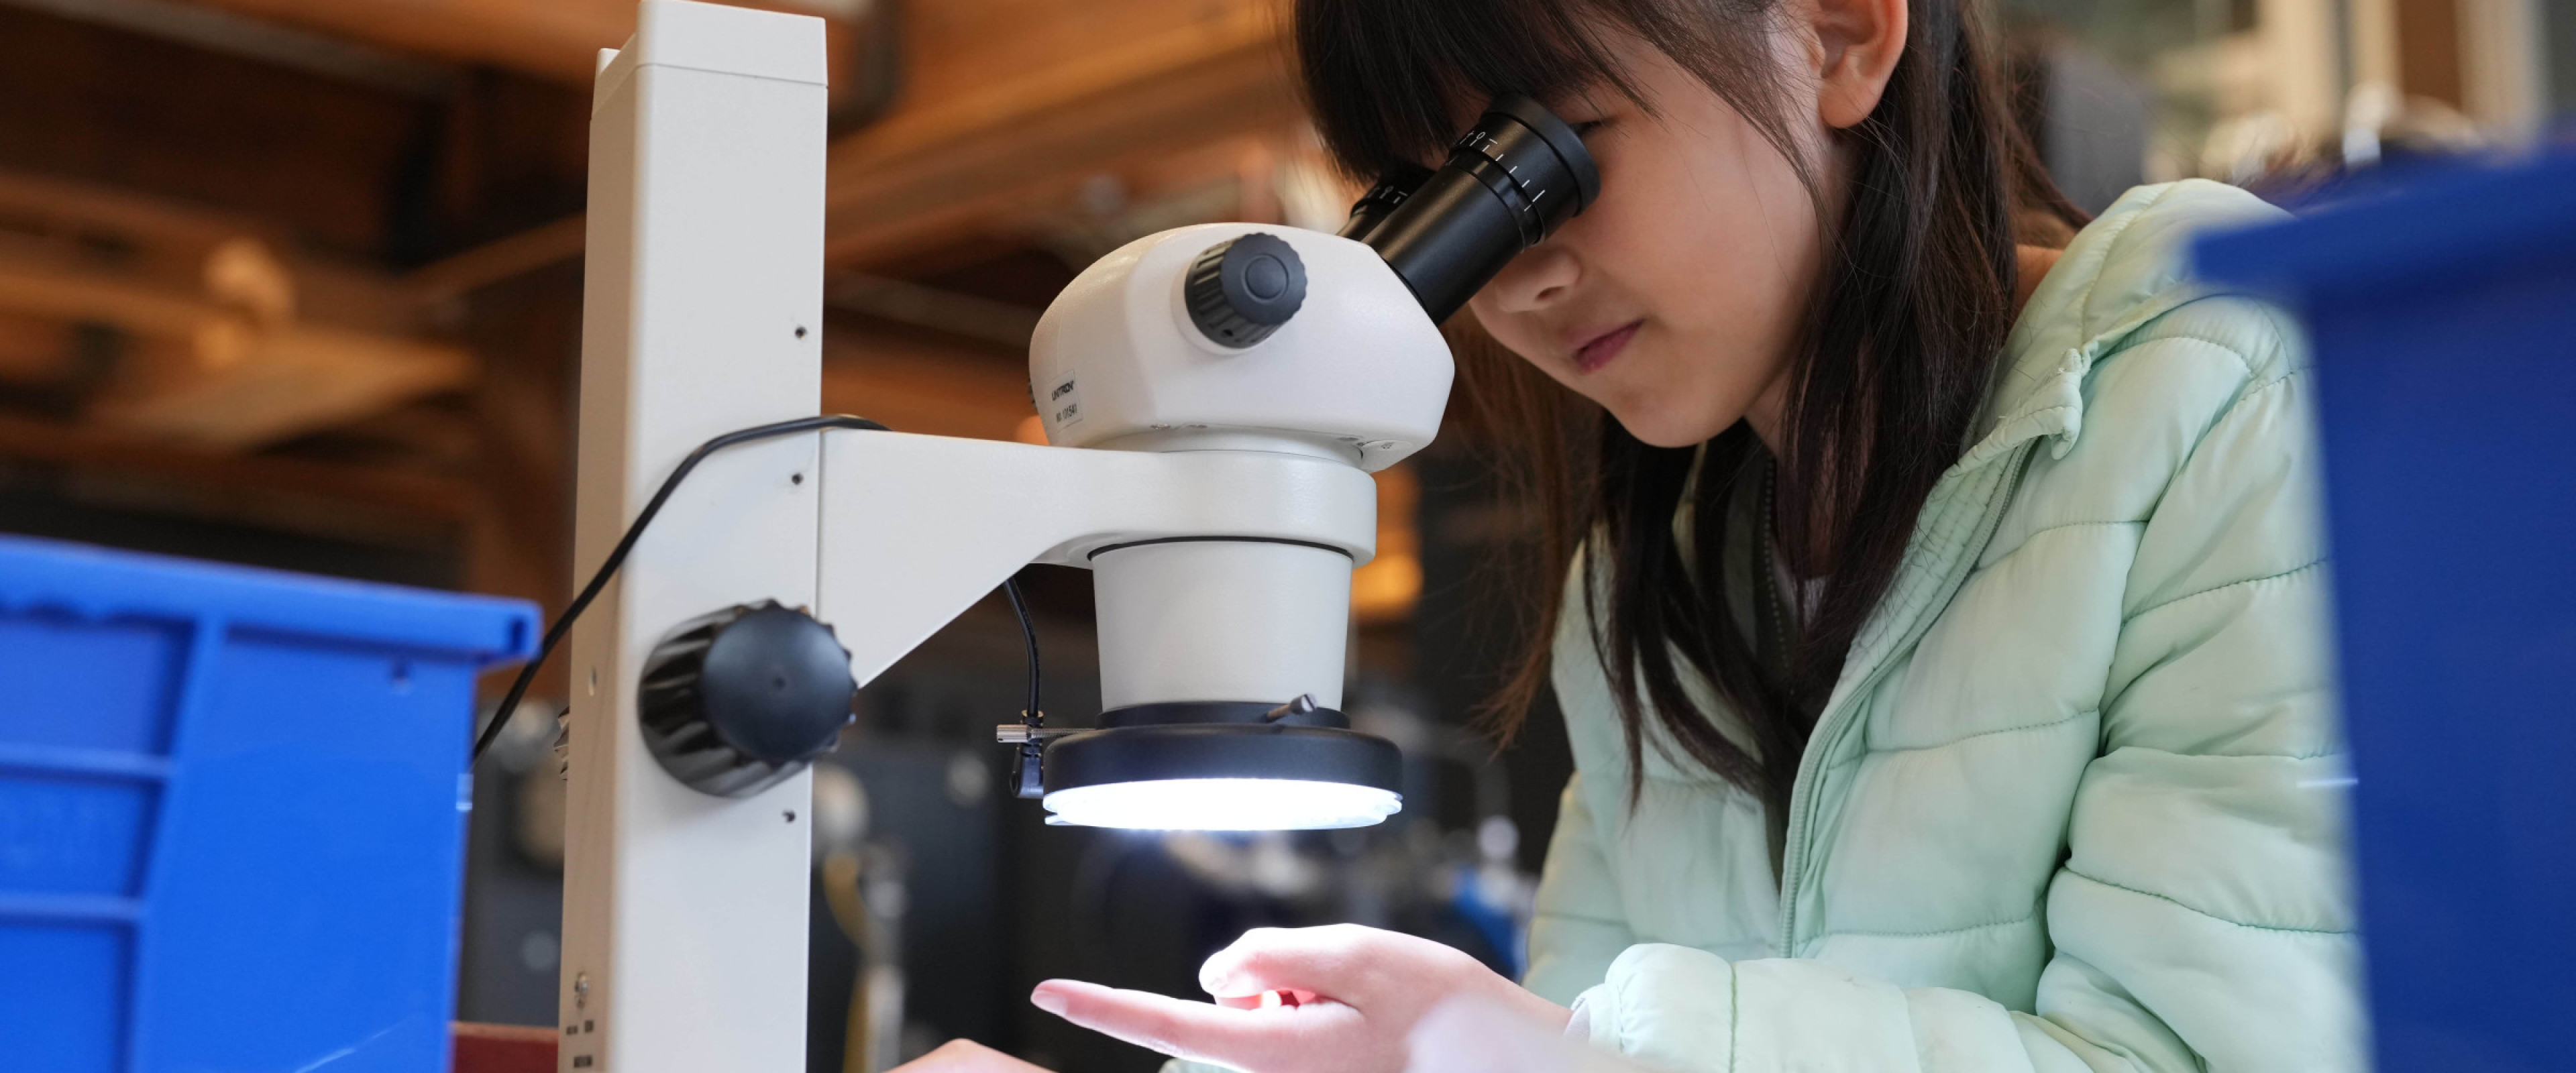 Young girl peering into the eyes of a microscope, examining her finger print.